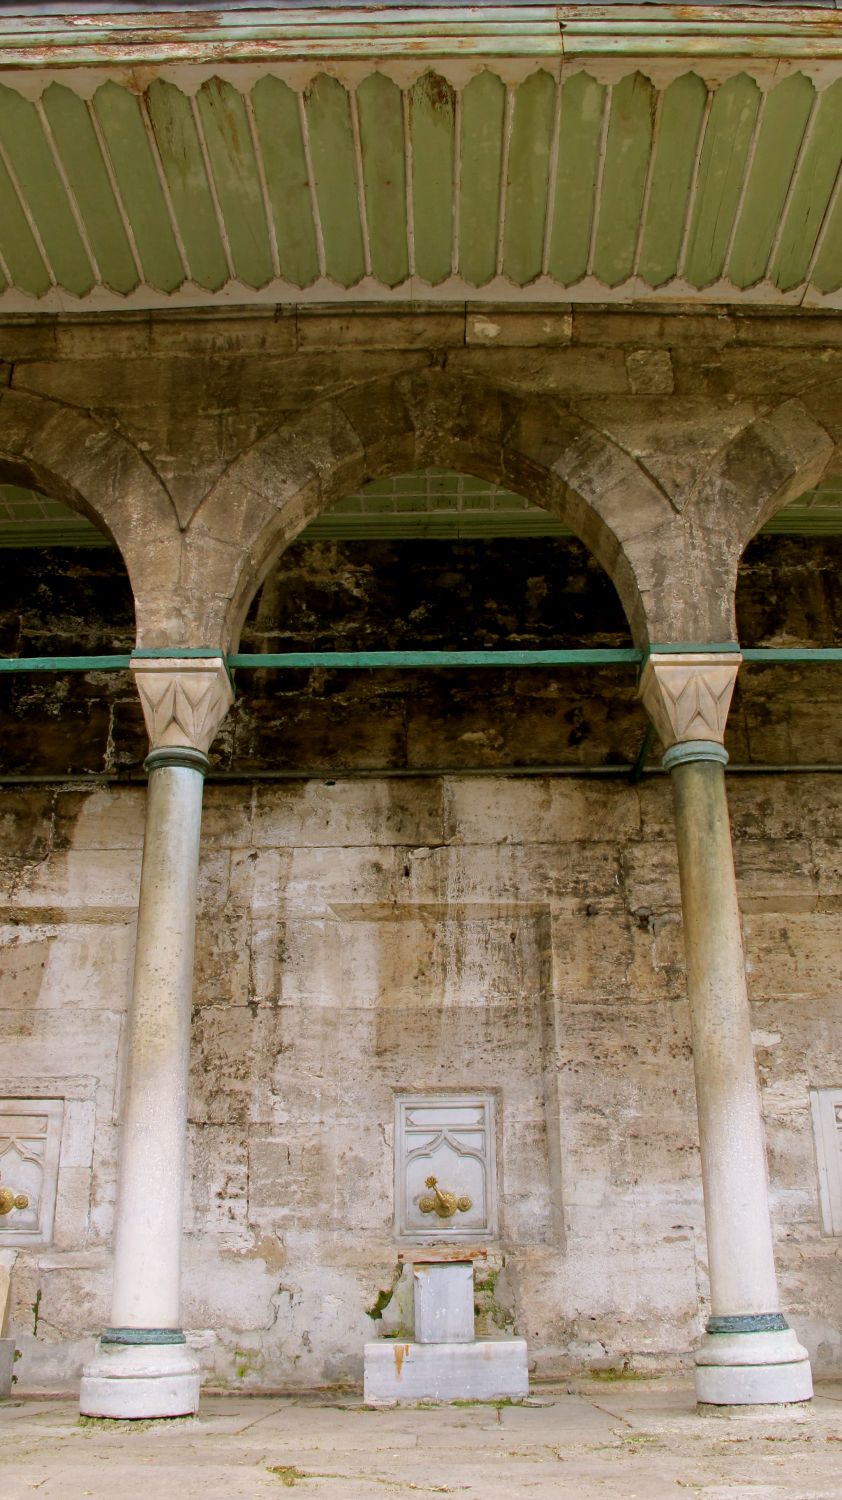 Detail view, one bay with ablution tap along colonnade wall of courtyard